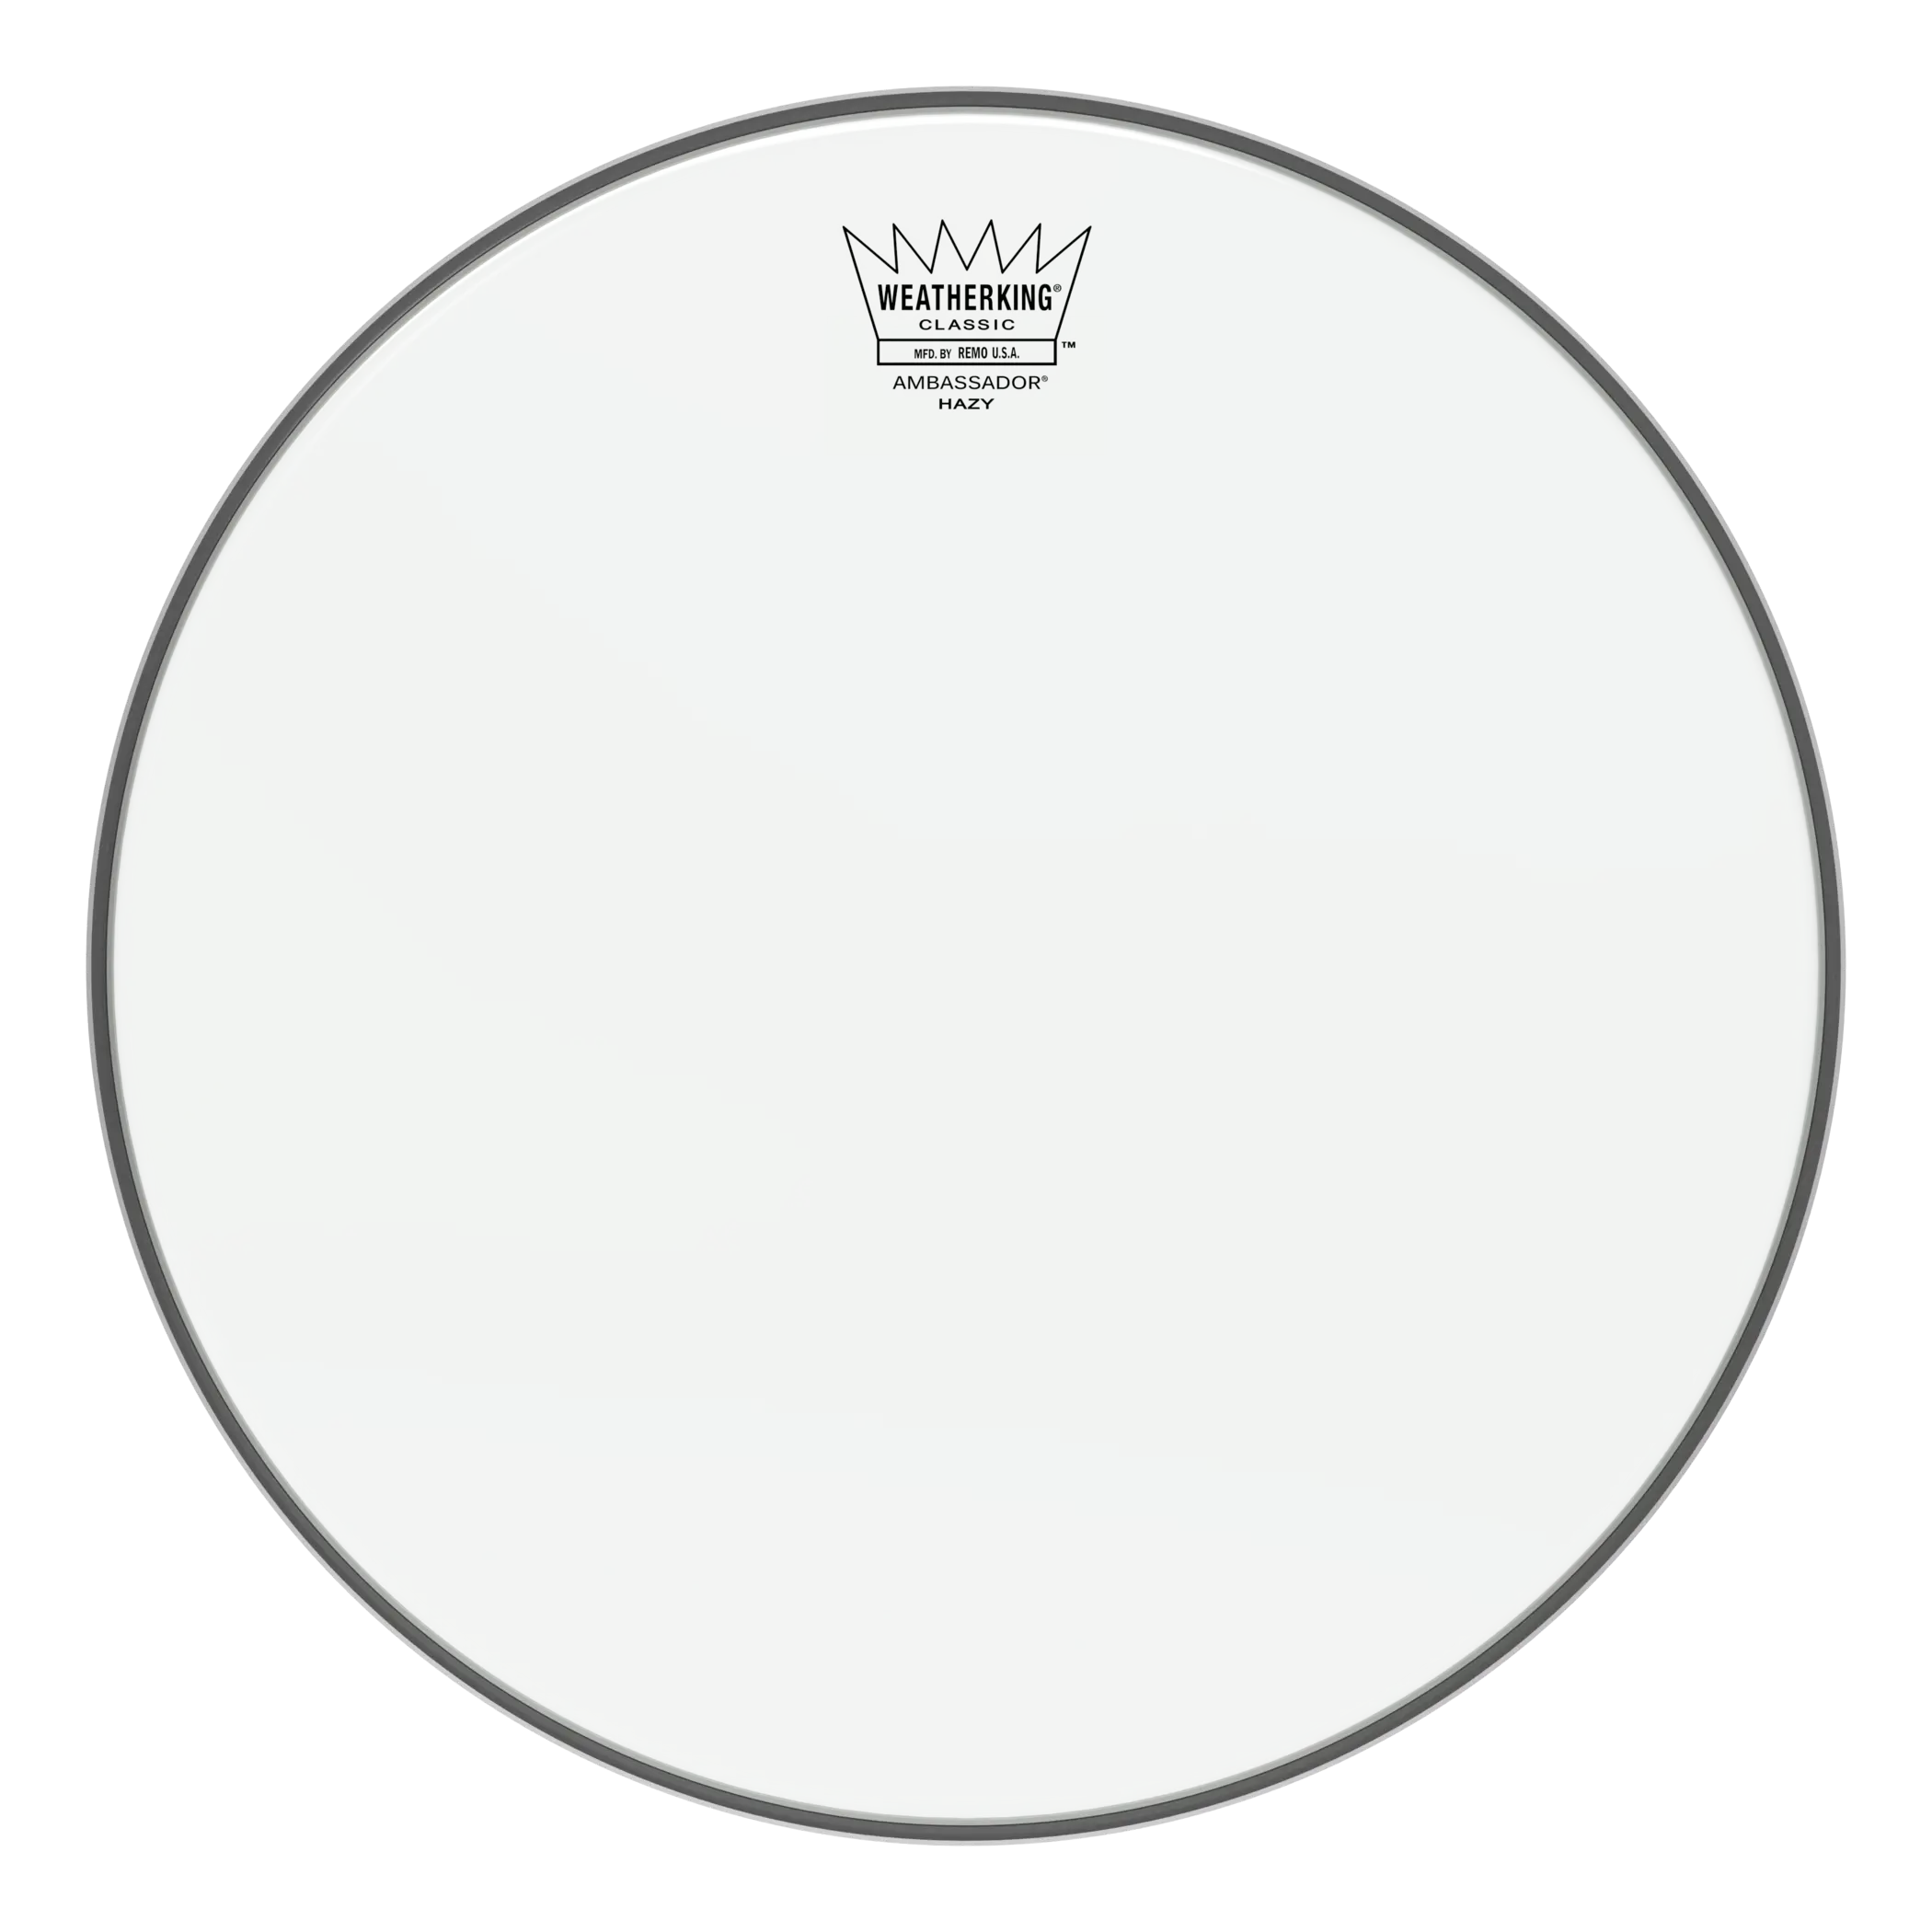 Remo 13" Snare Side Hazy Classic Fit Ambassador Clear Drumhead